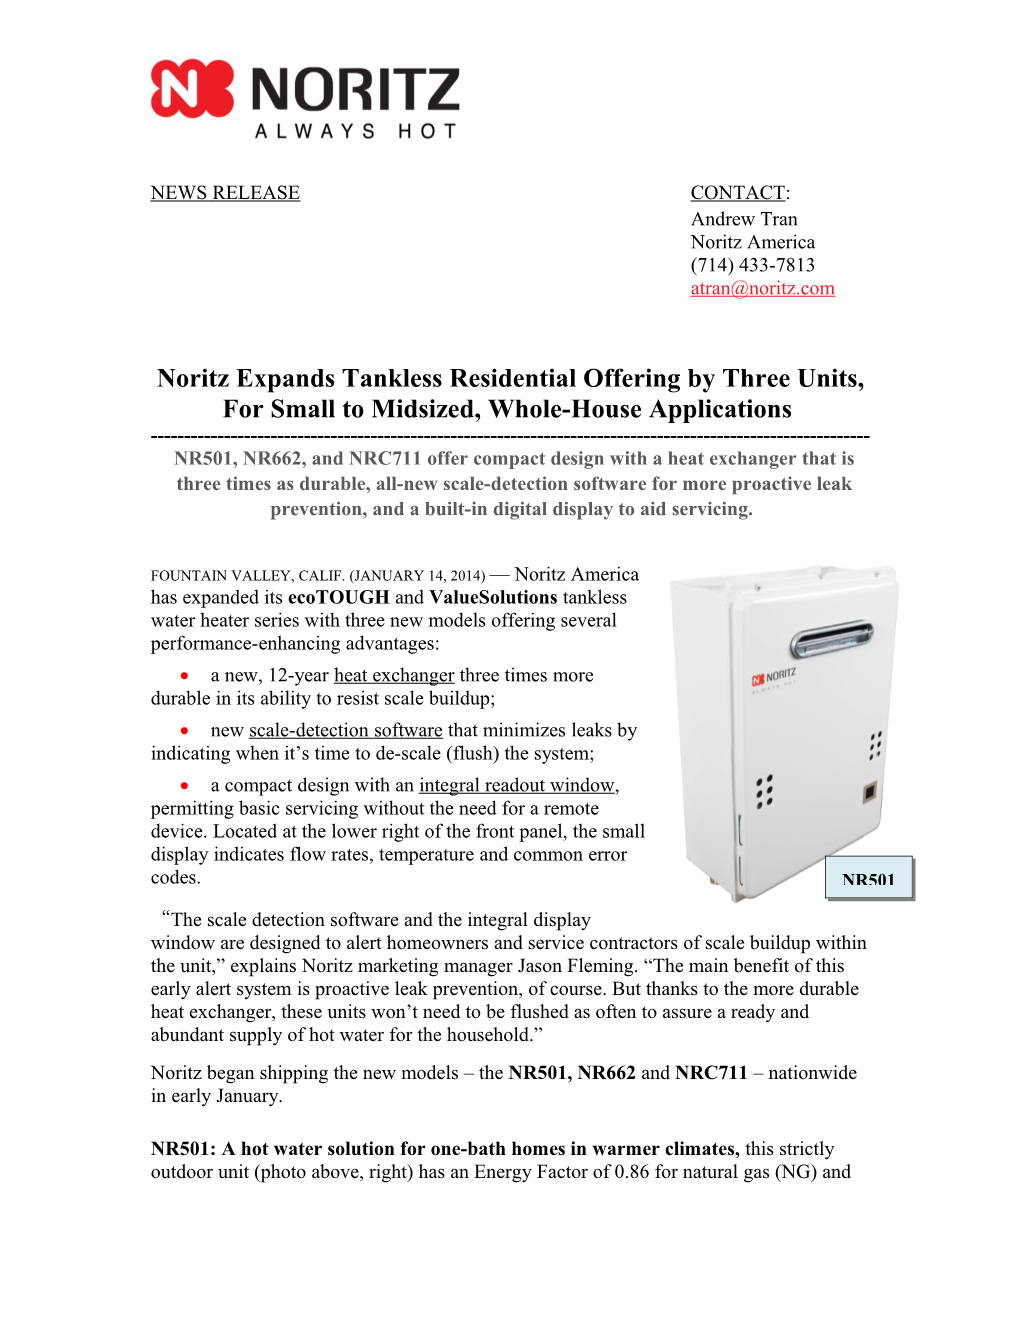 THREE New Residential TANKLESS OFFERINGS